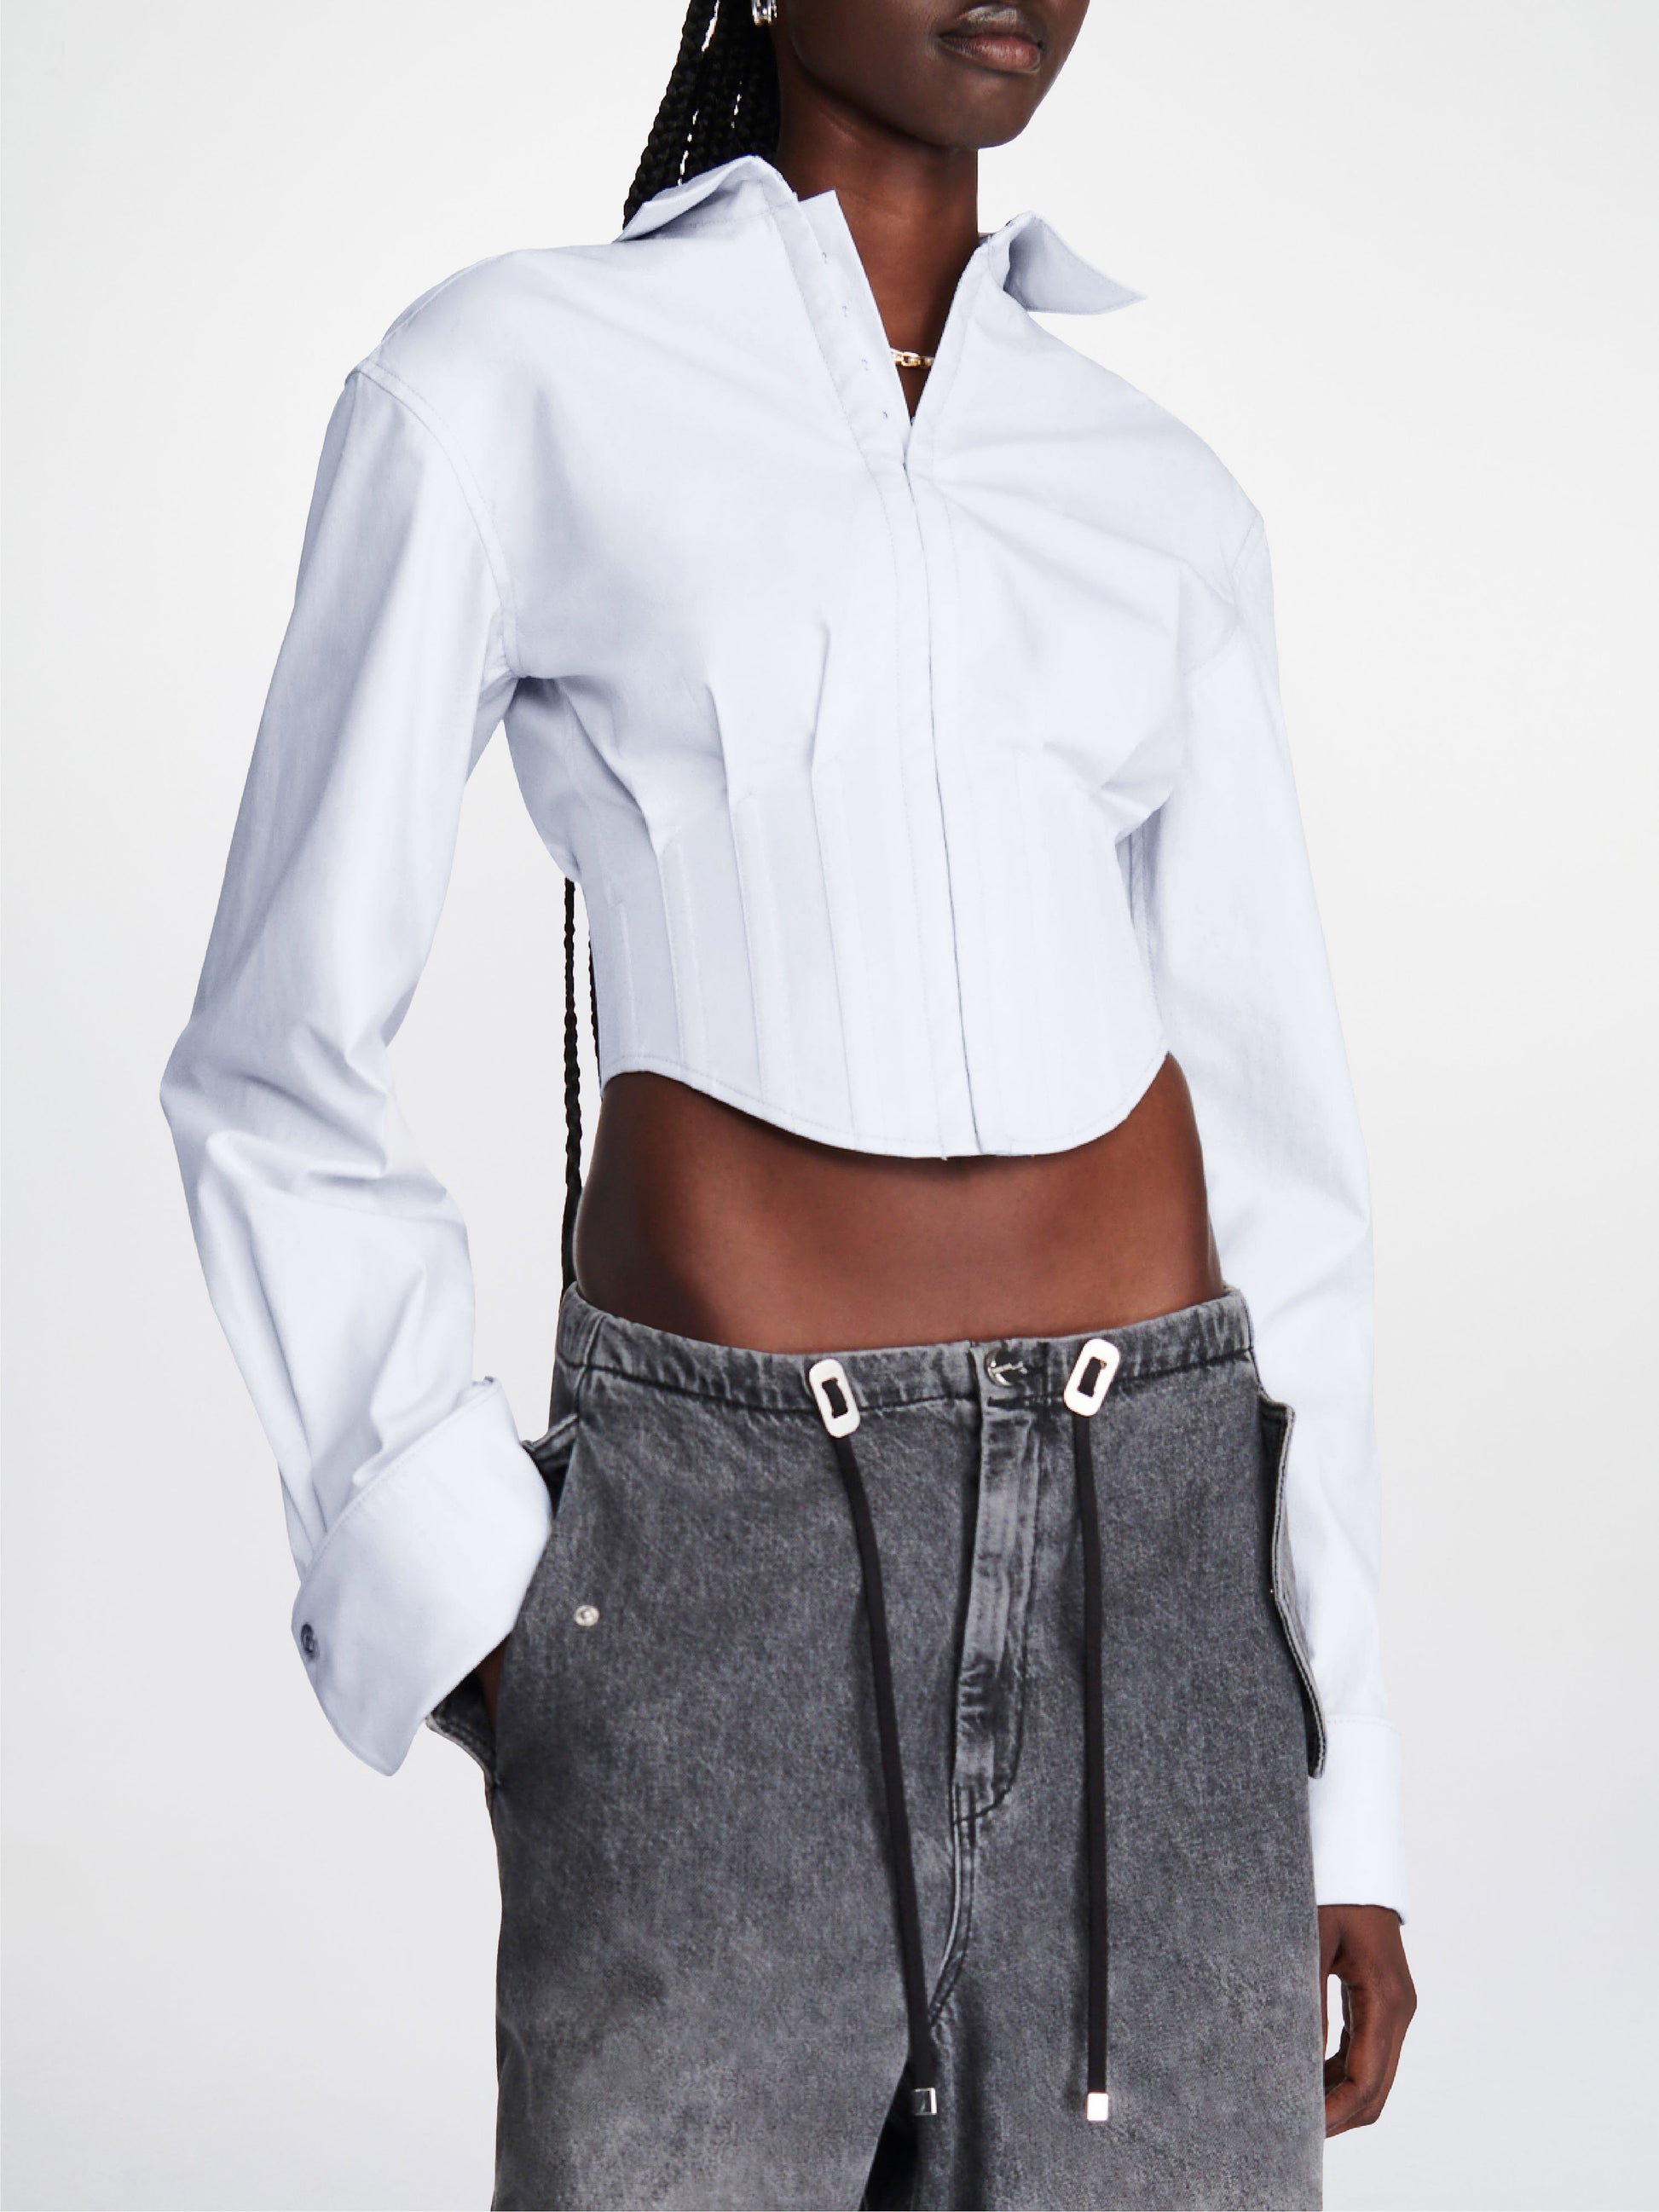 The new Trend Dion Lee Tuxedo Corset Shirt in Steam available at The New Trend Australia